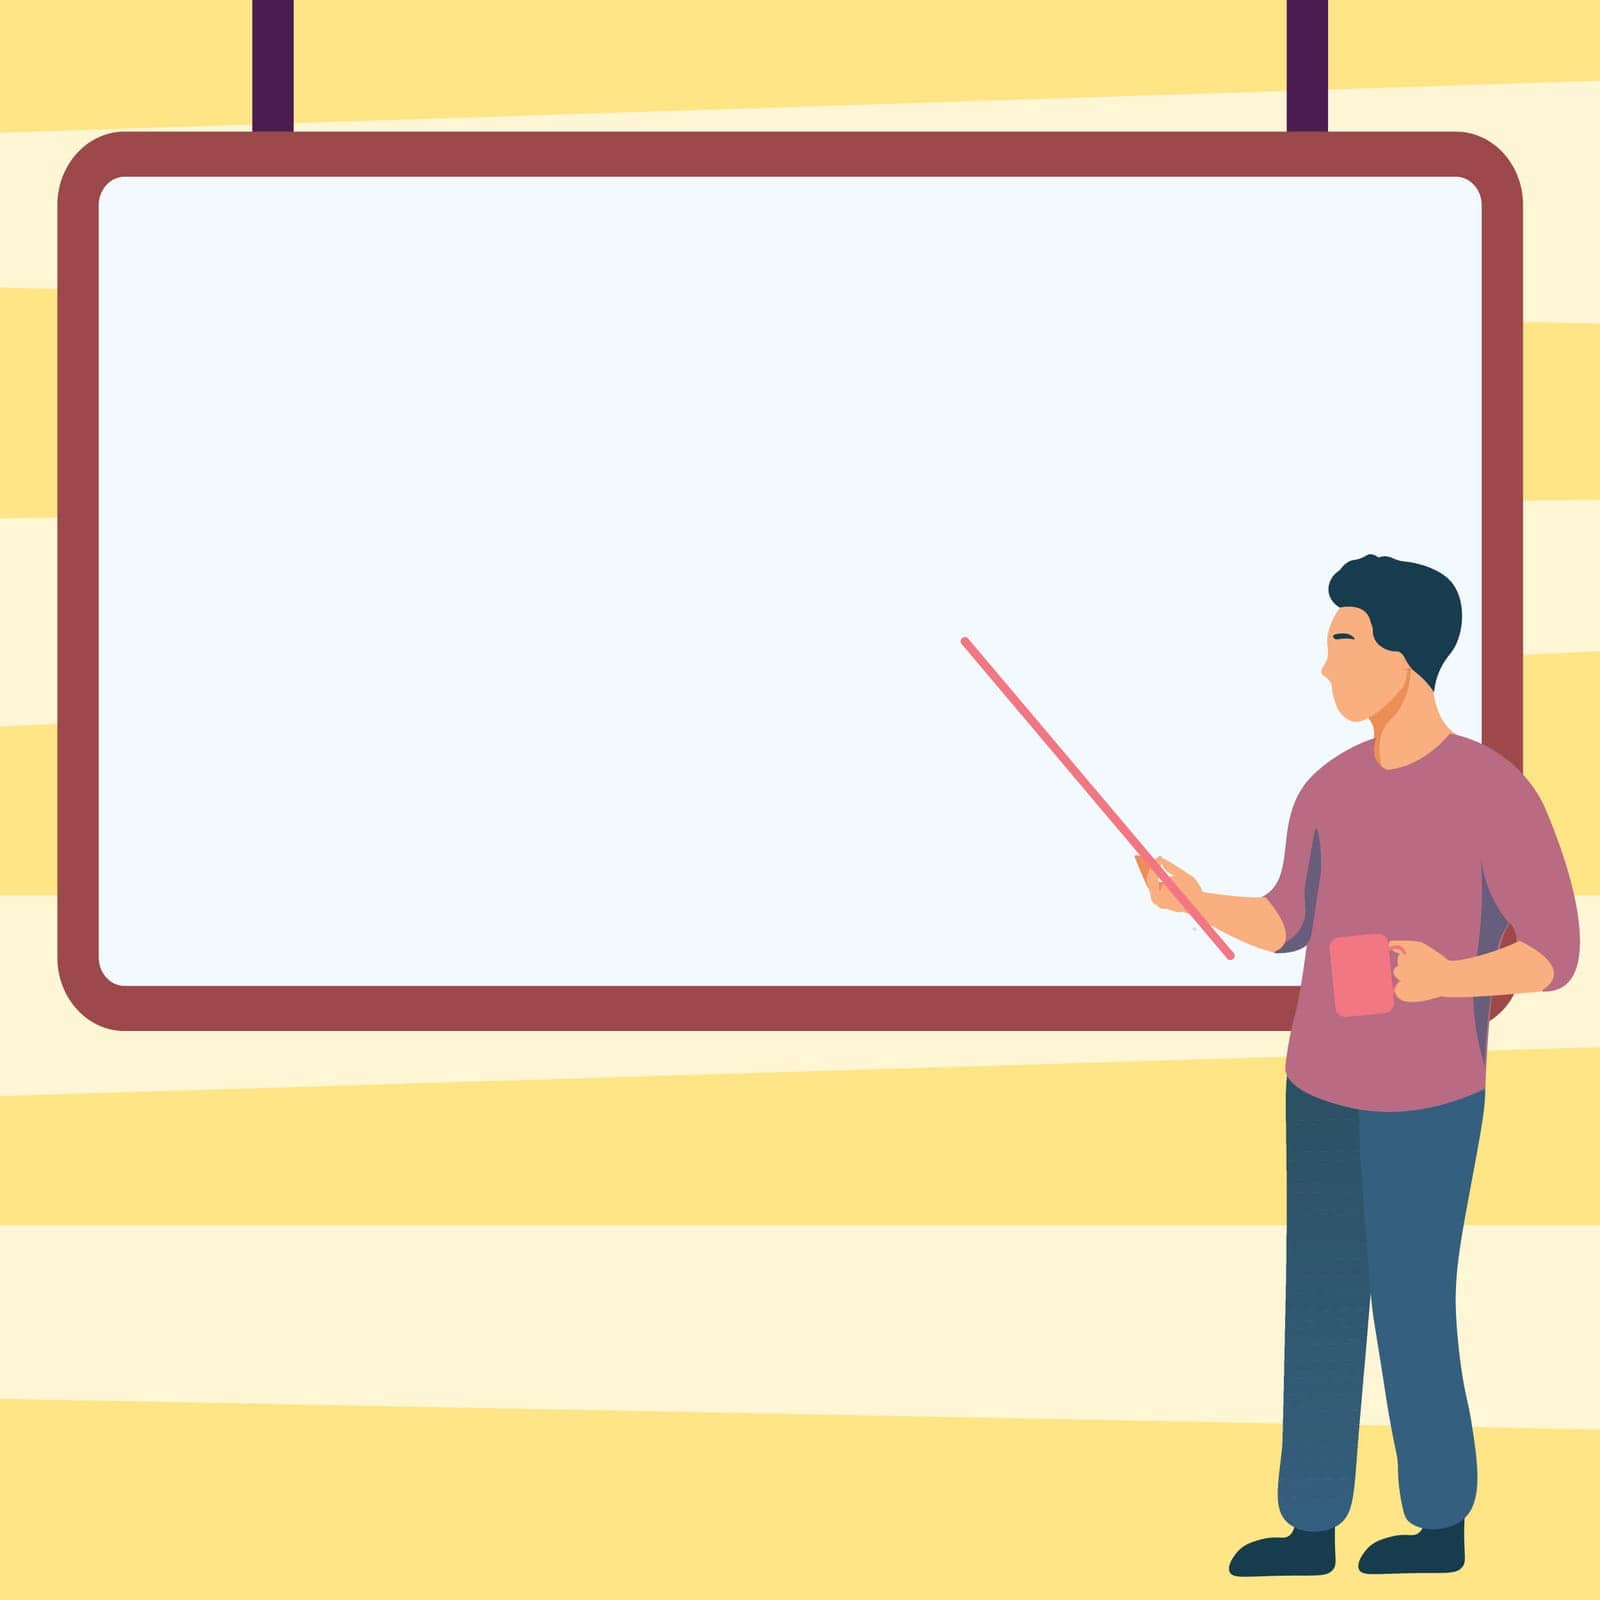 Man pointing with stick to important information written on whiteboard.